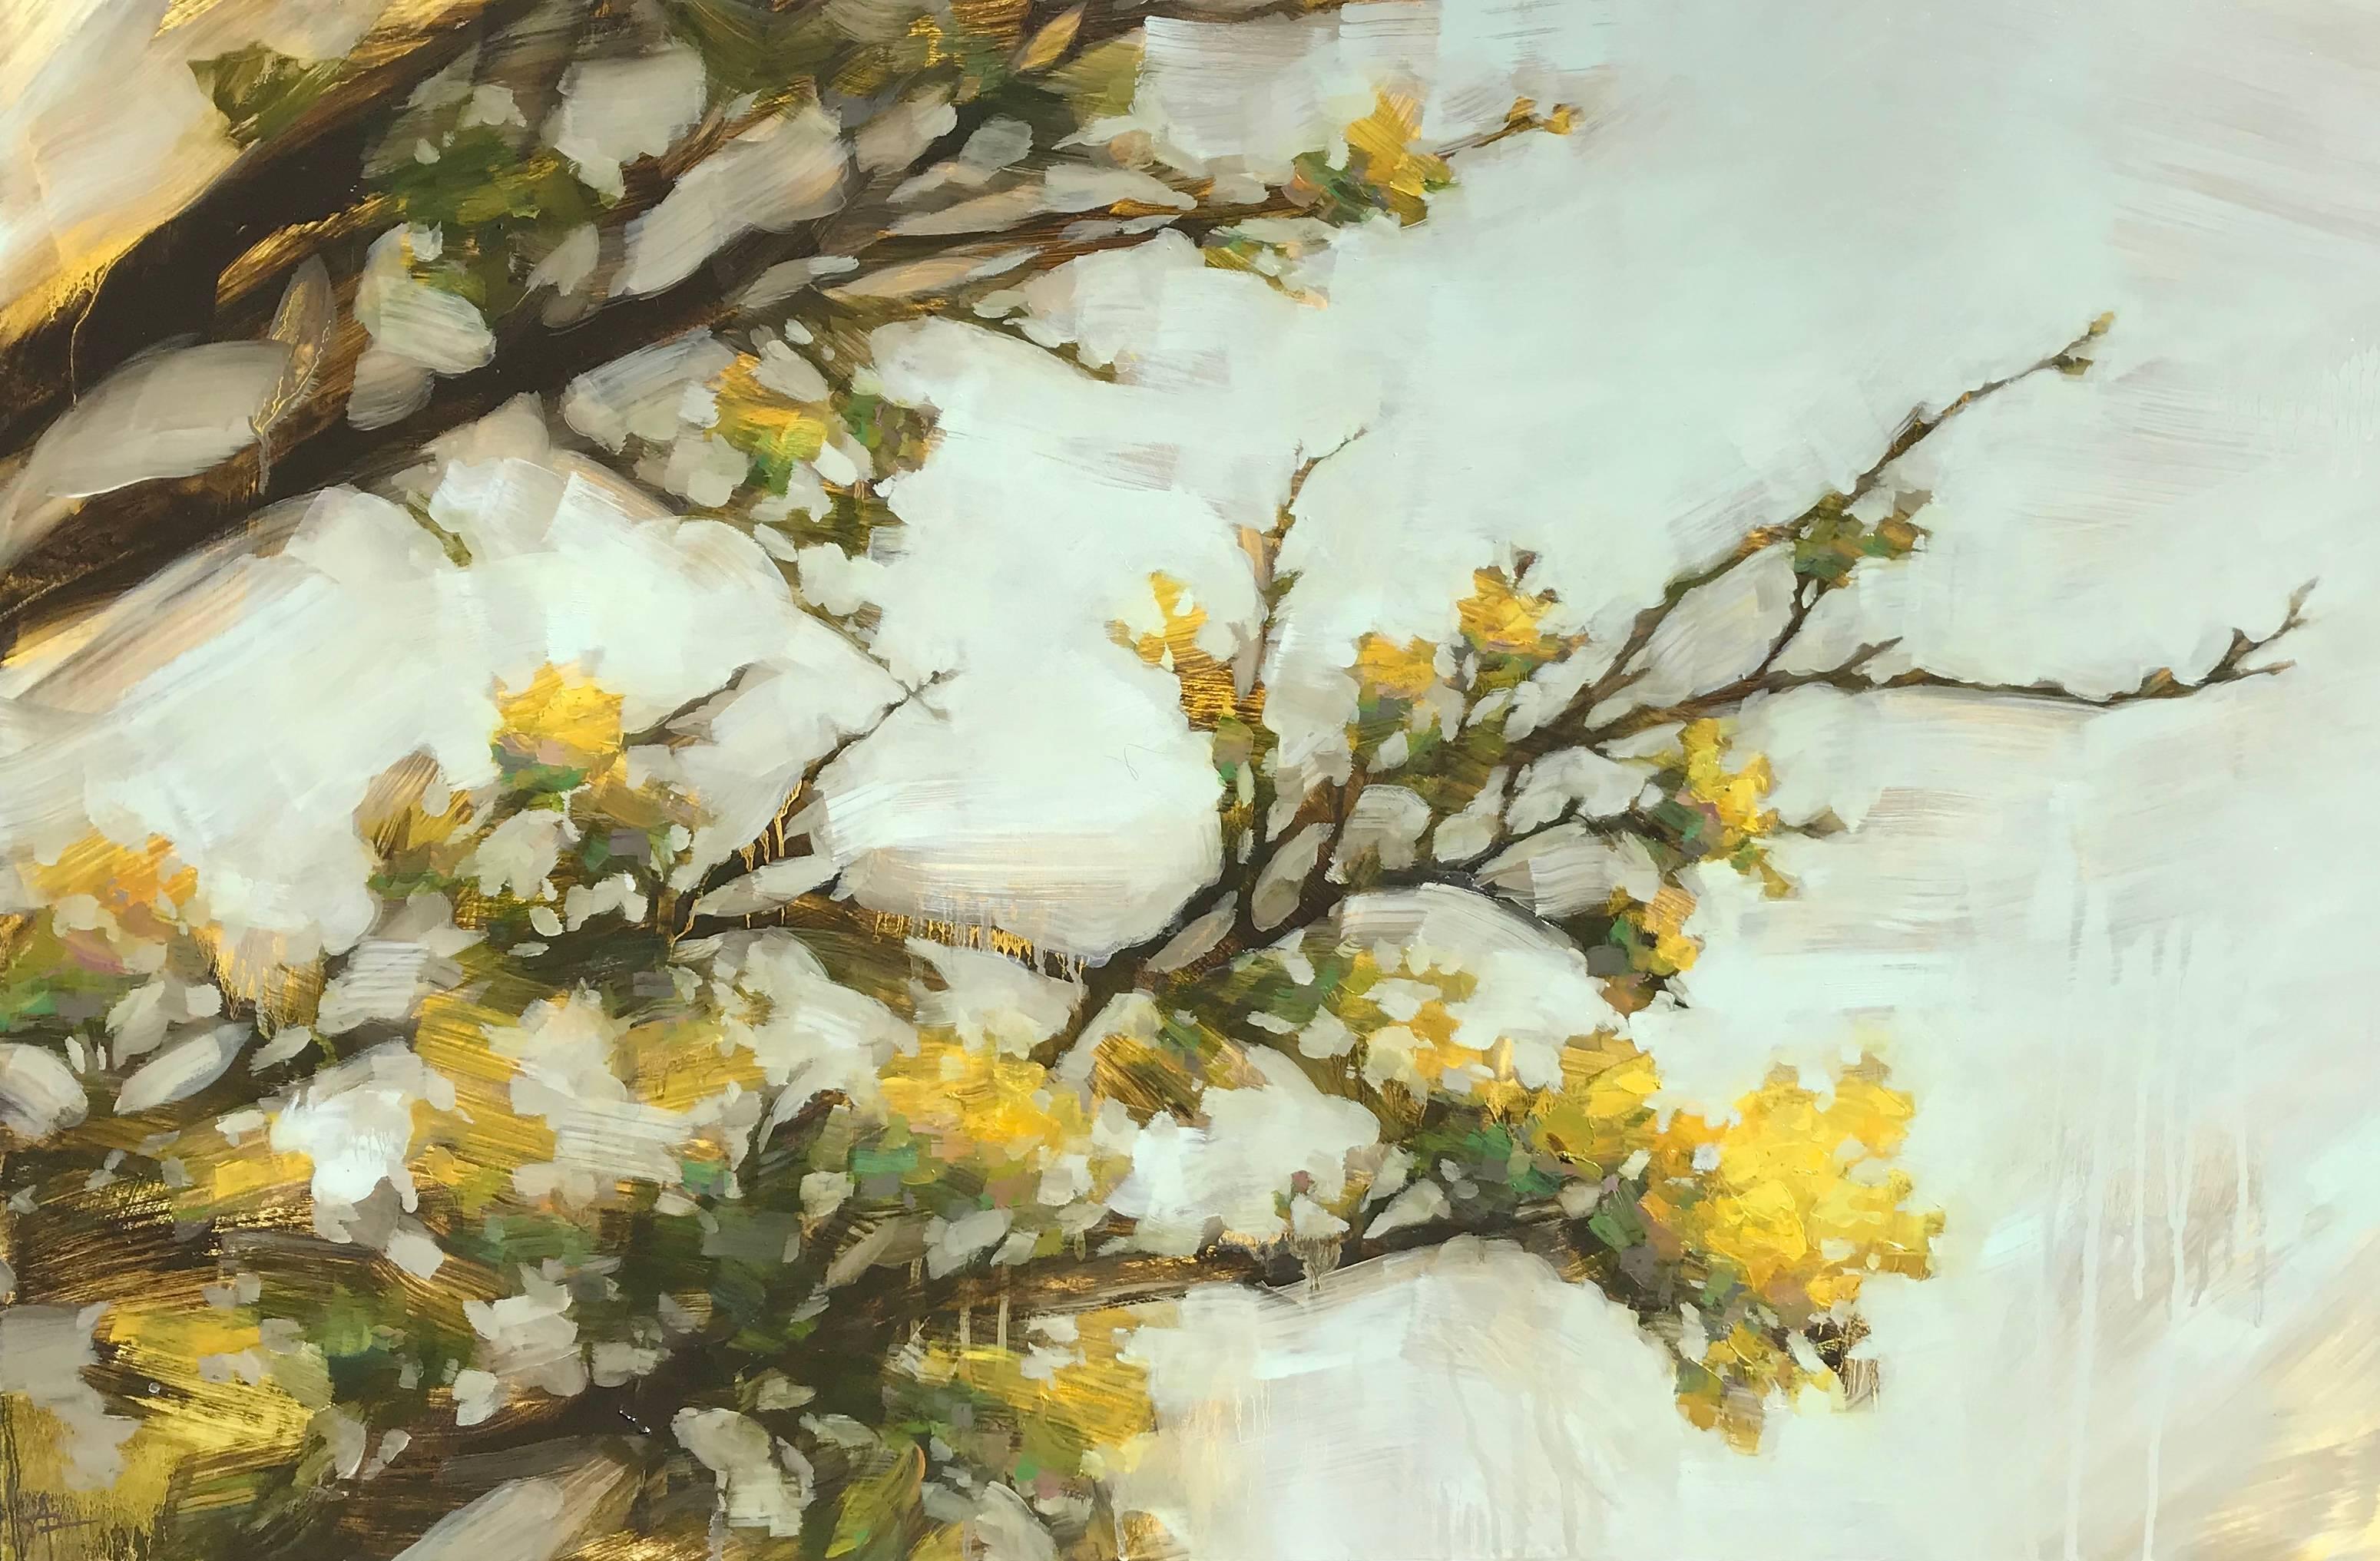 Angie Renfro Landscape Painting - 'Then as Now', Oil on Board Horizontal Painting Depicting a Yellow Blooming Tree